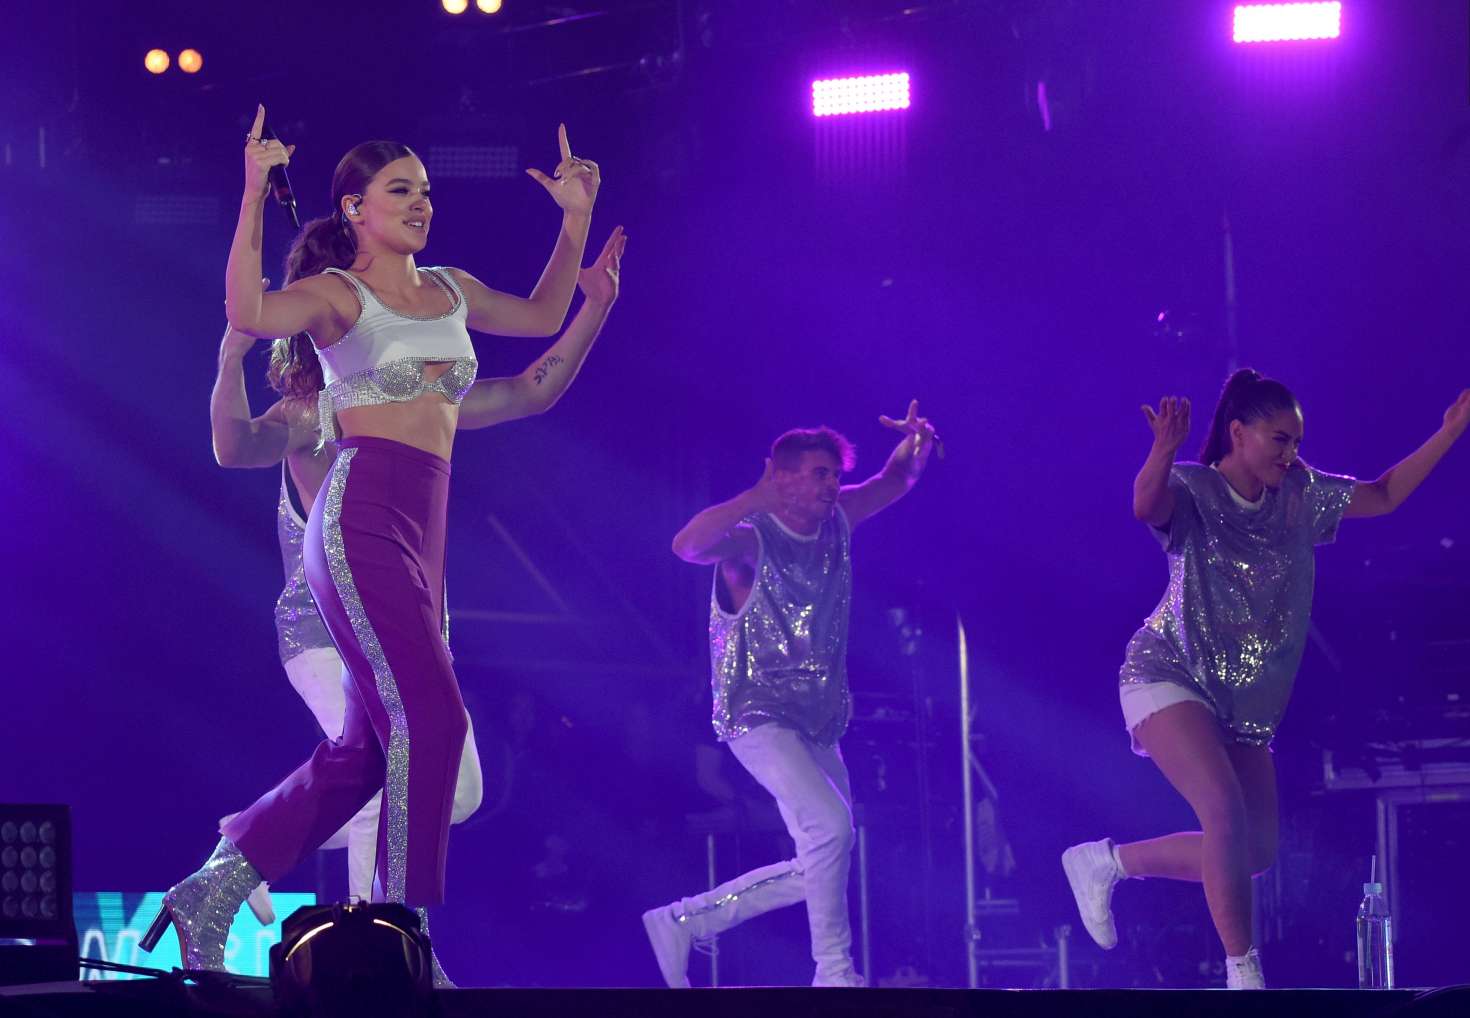 Hailee Steinfeld â€“ Performs at the Isle of MTV Concert in Malta